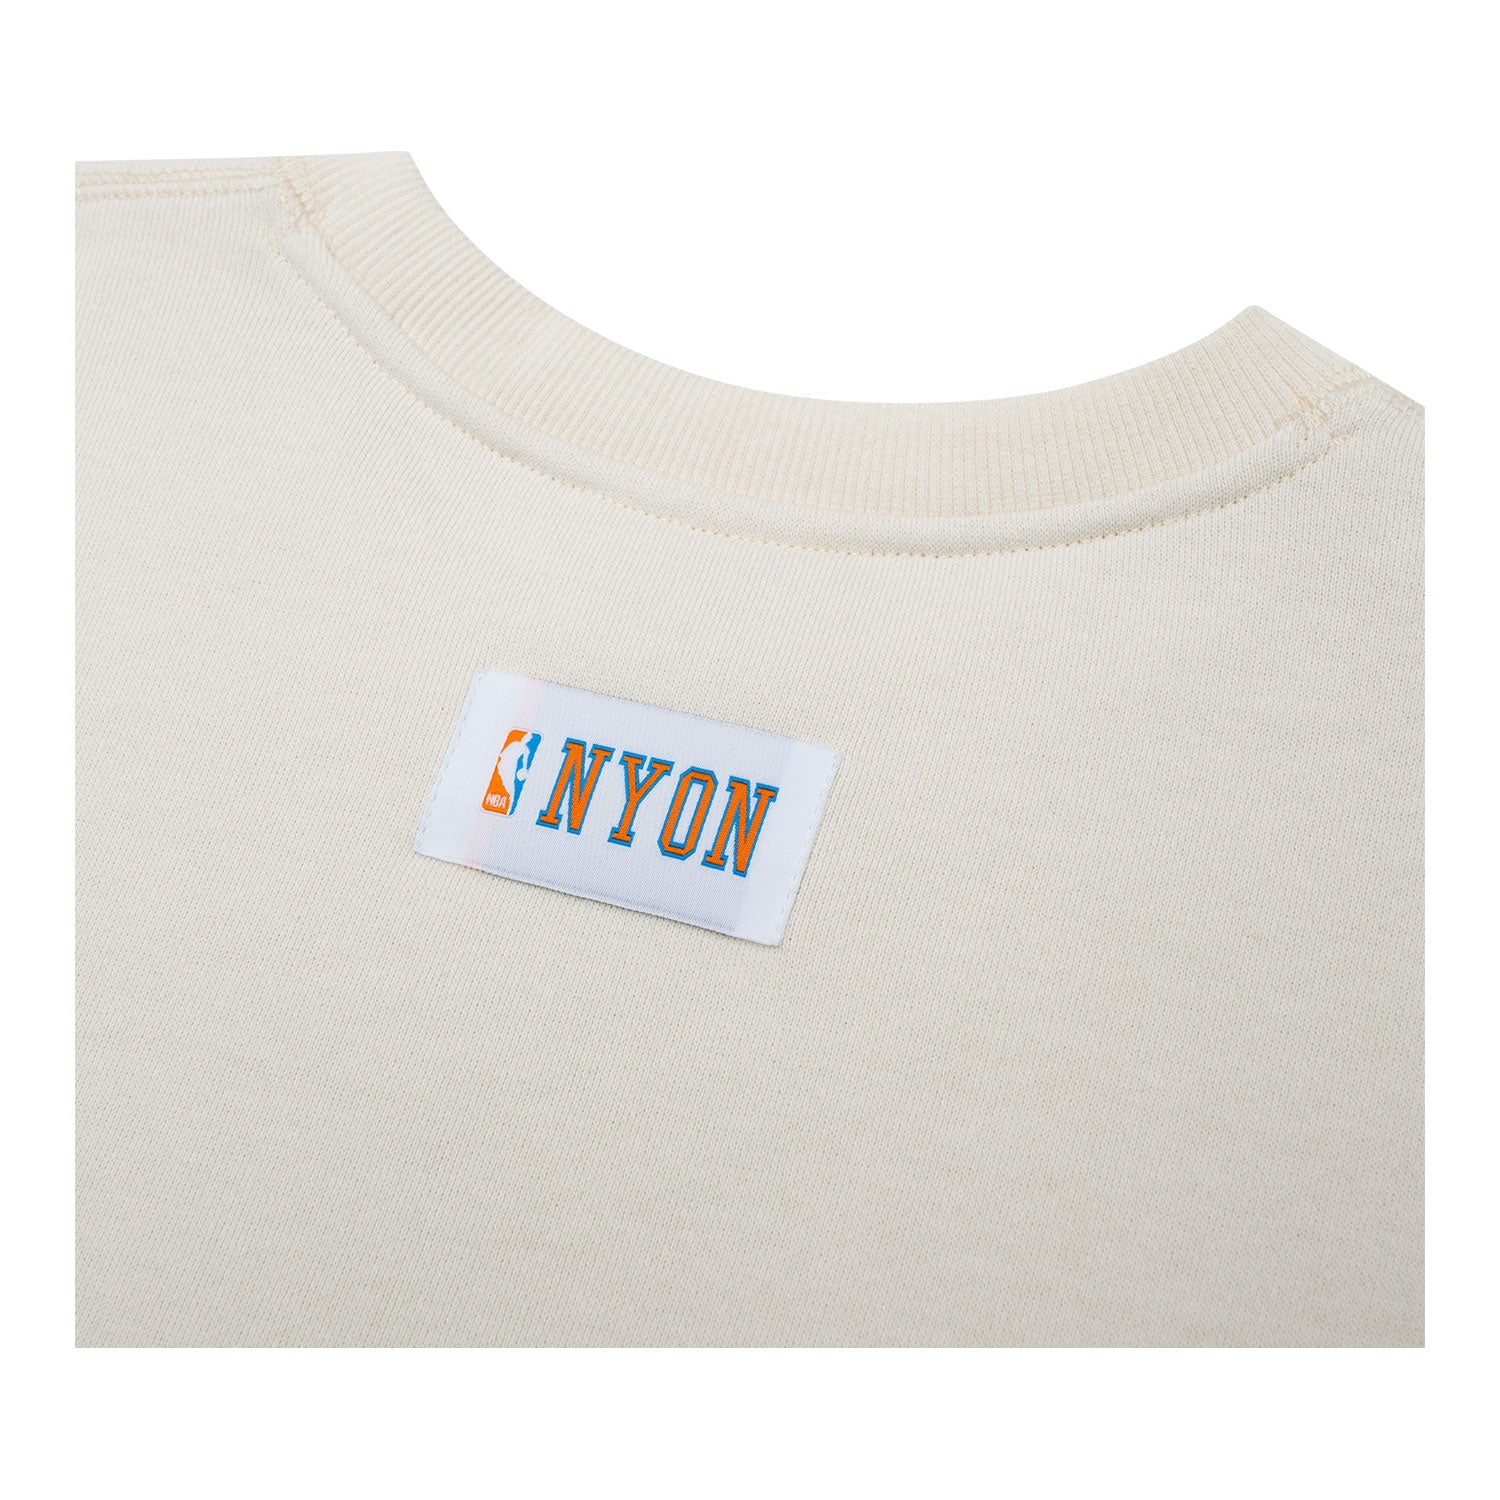 NYON x Knicks "Heyday" Crewneck - In White - Close Up Back View